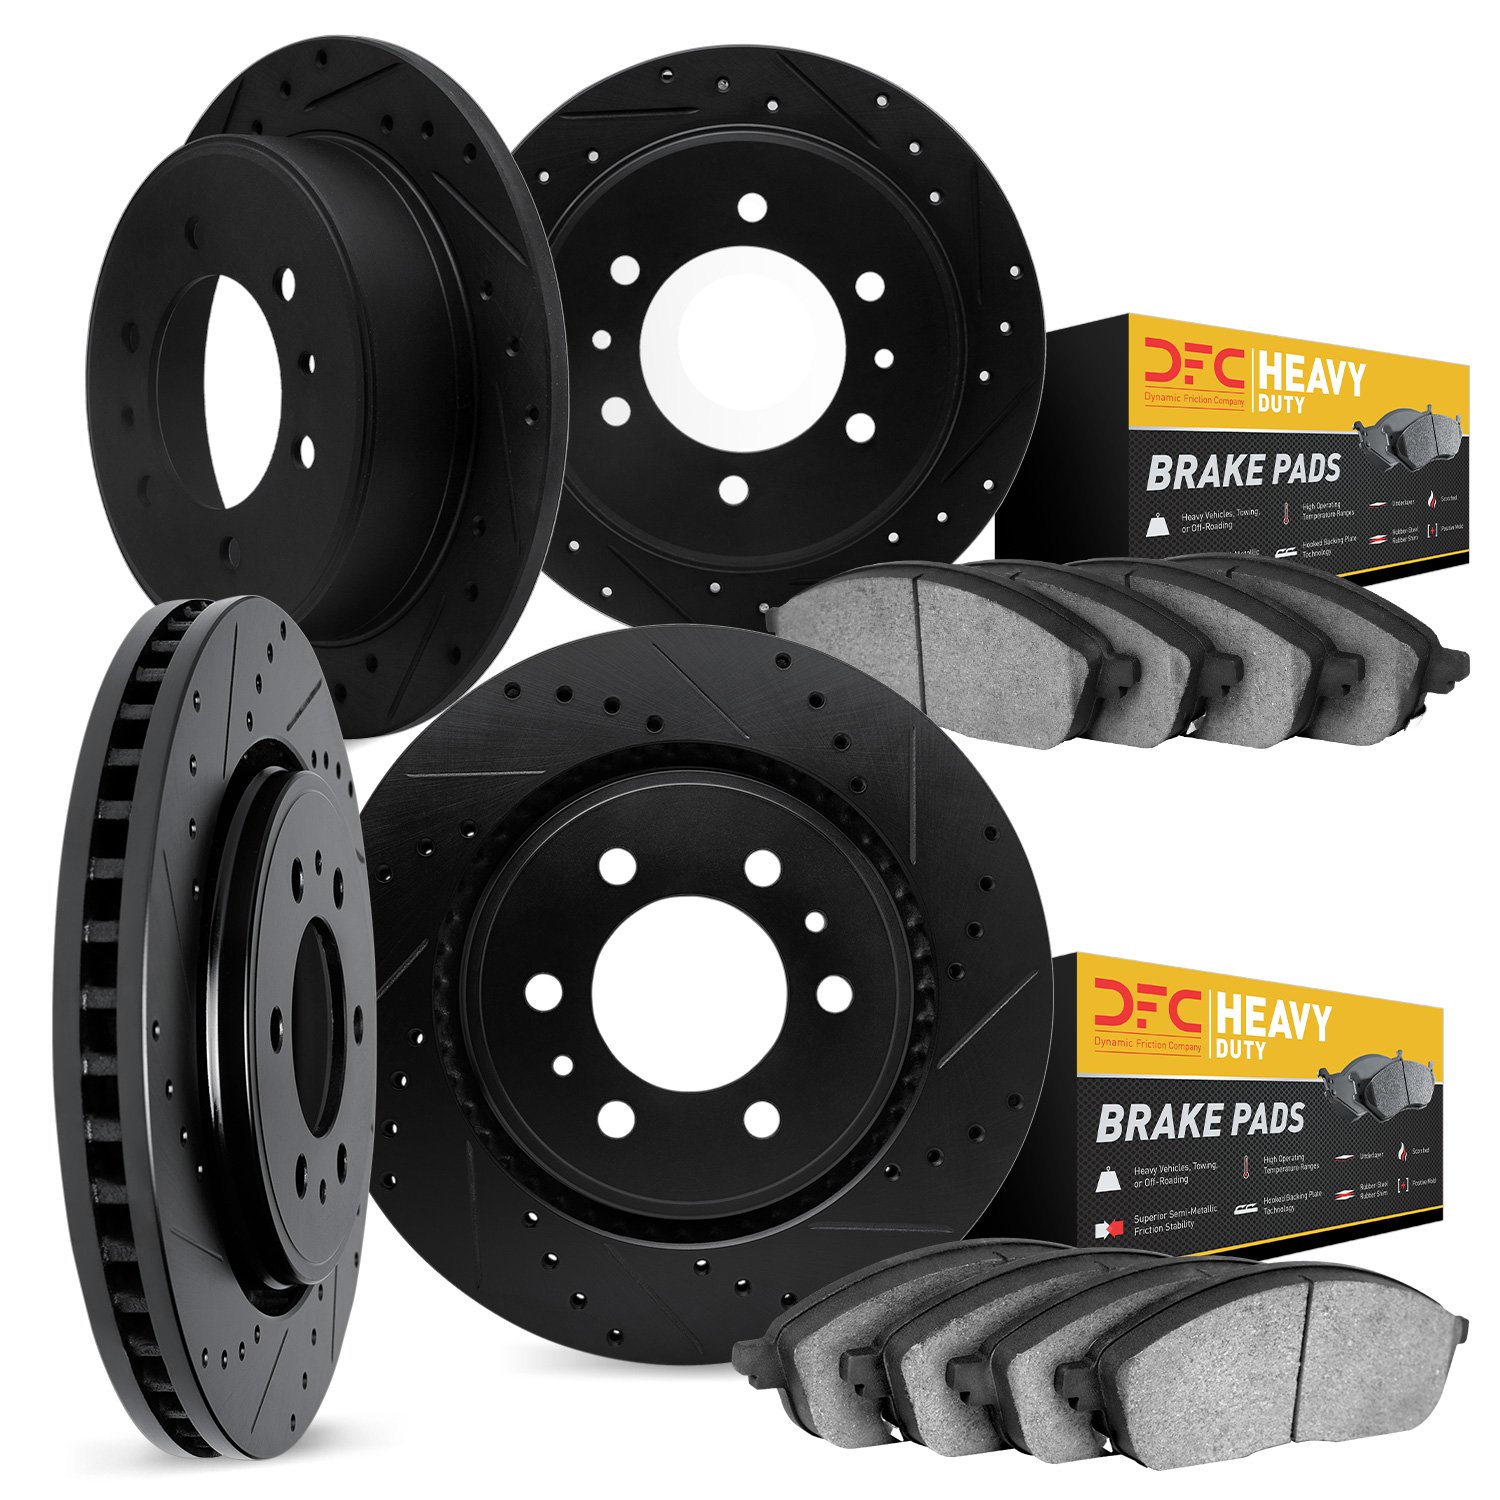 8204-40224 Drilled/Slotted Rotors w/Heavy-Duty Brake Pads Kit [Silver], 2003-2004 Mopar, Position: Front and Rear